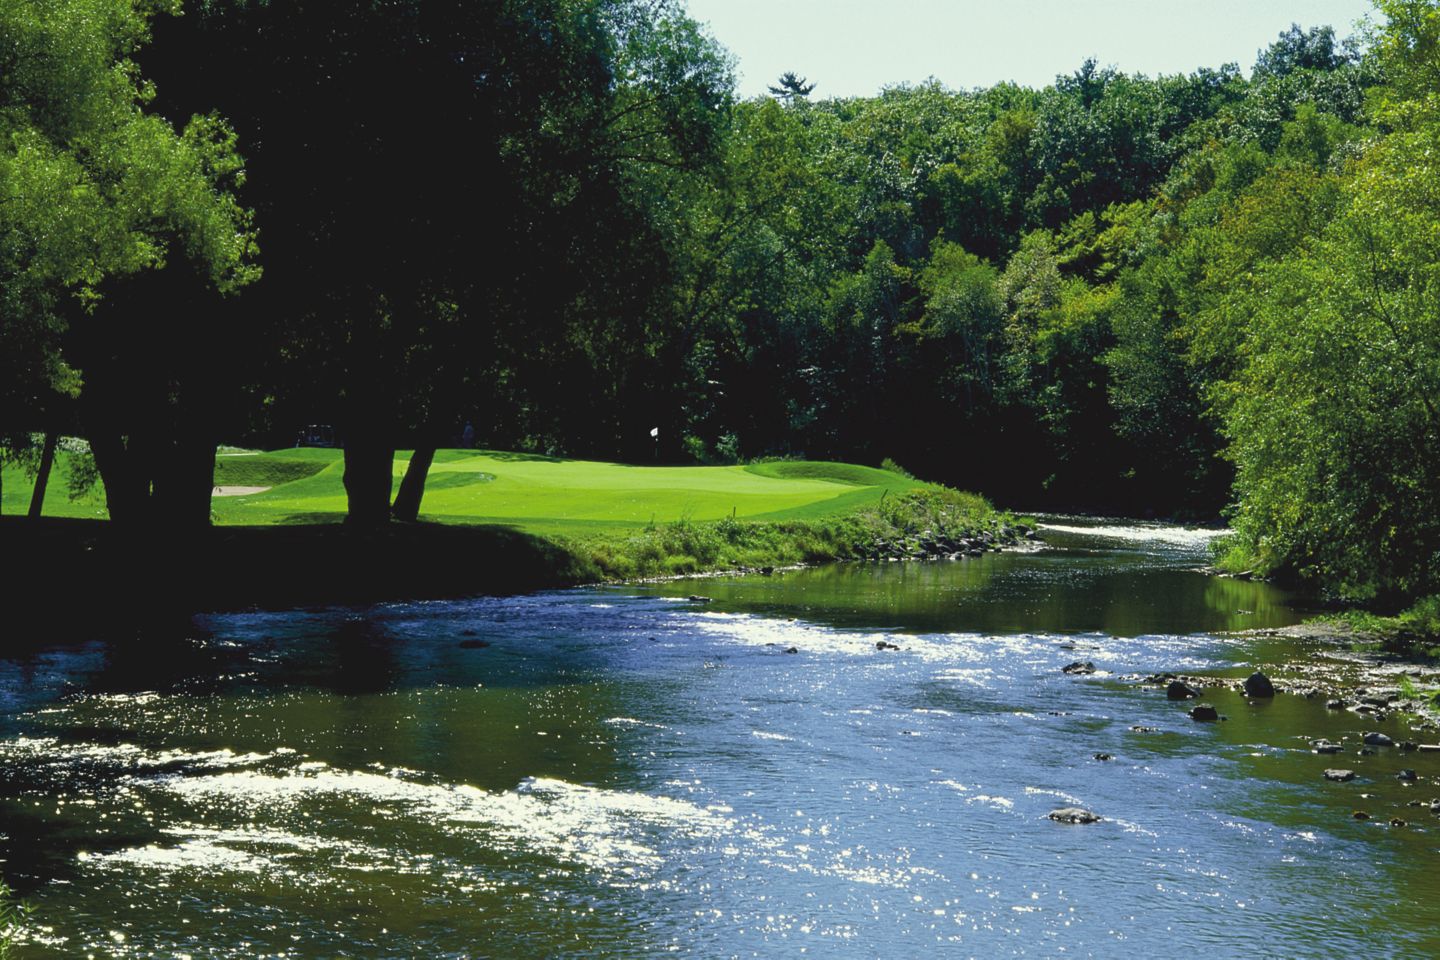 The green of hole 13 on The River course in the background with the river on the right. 